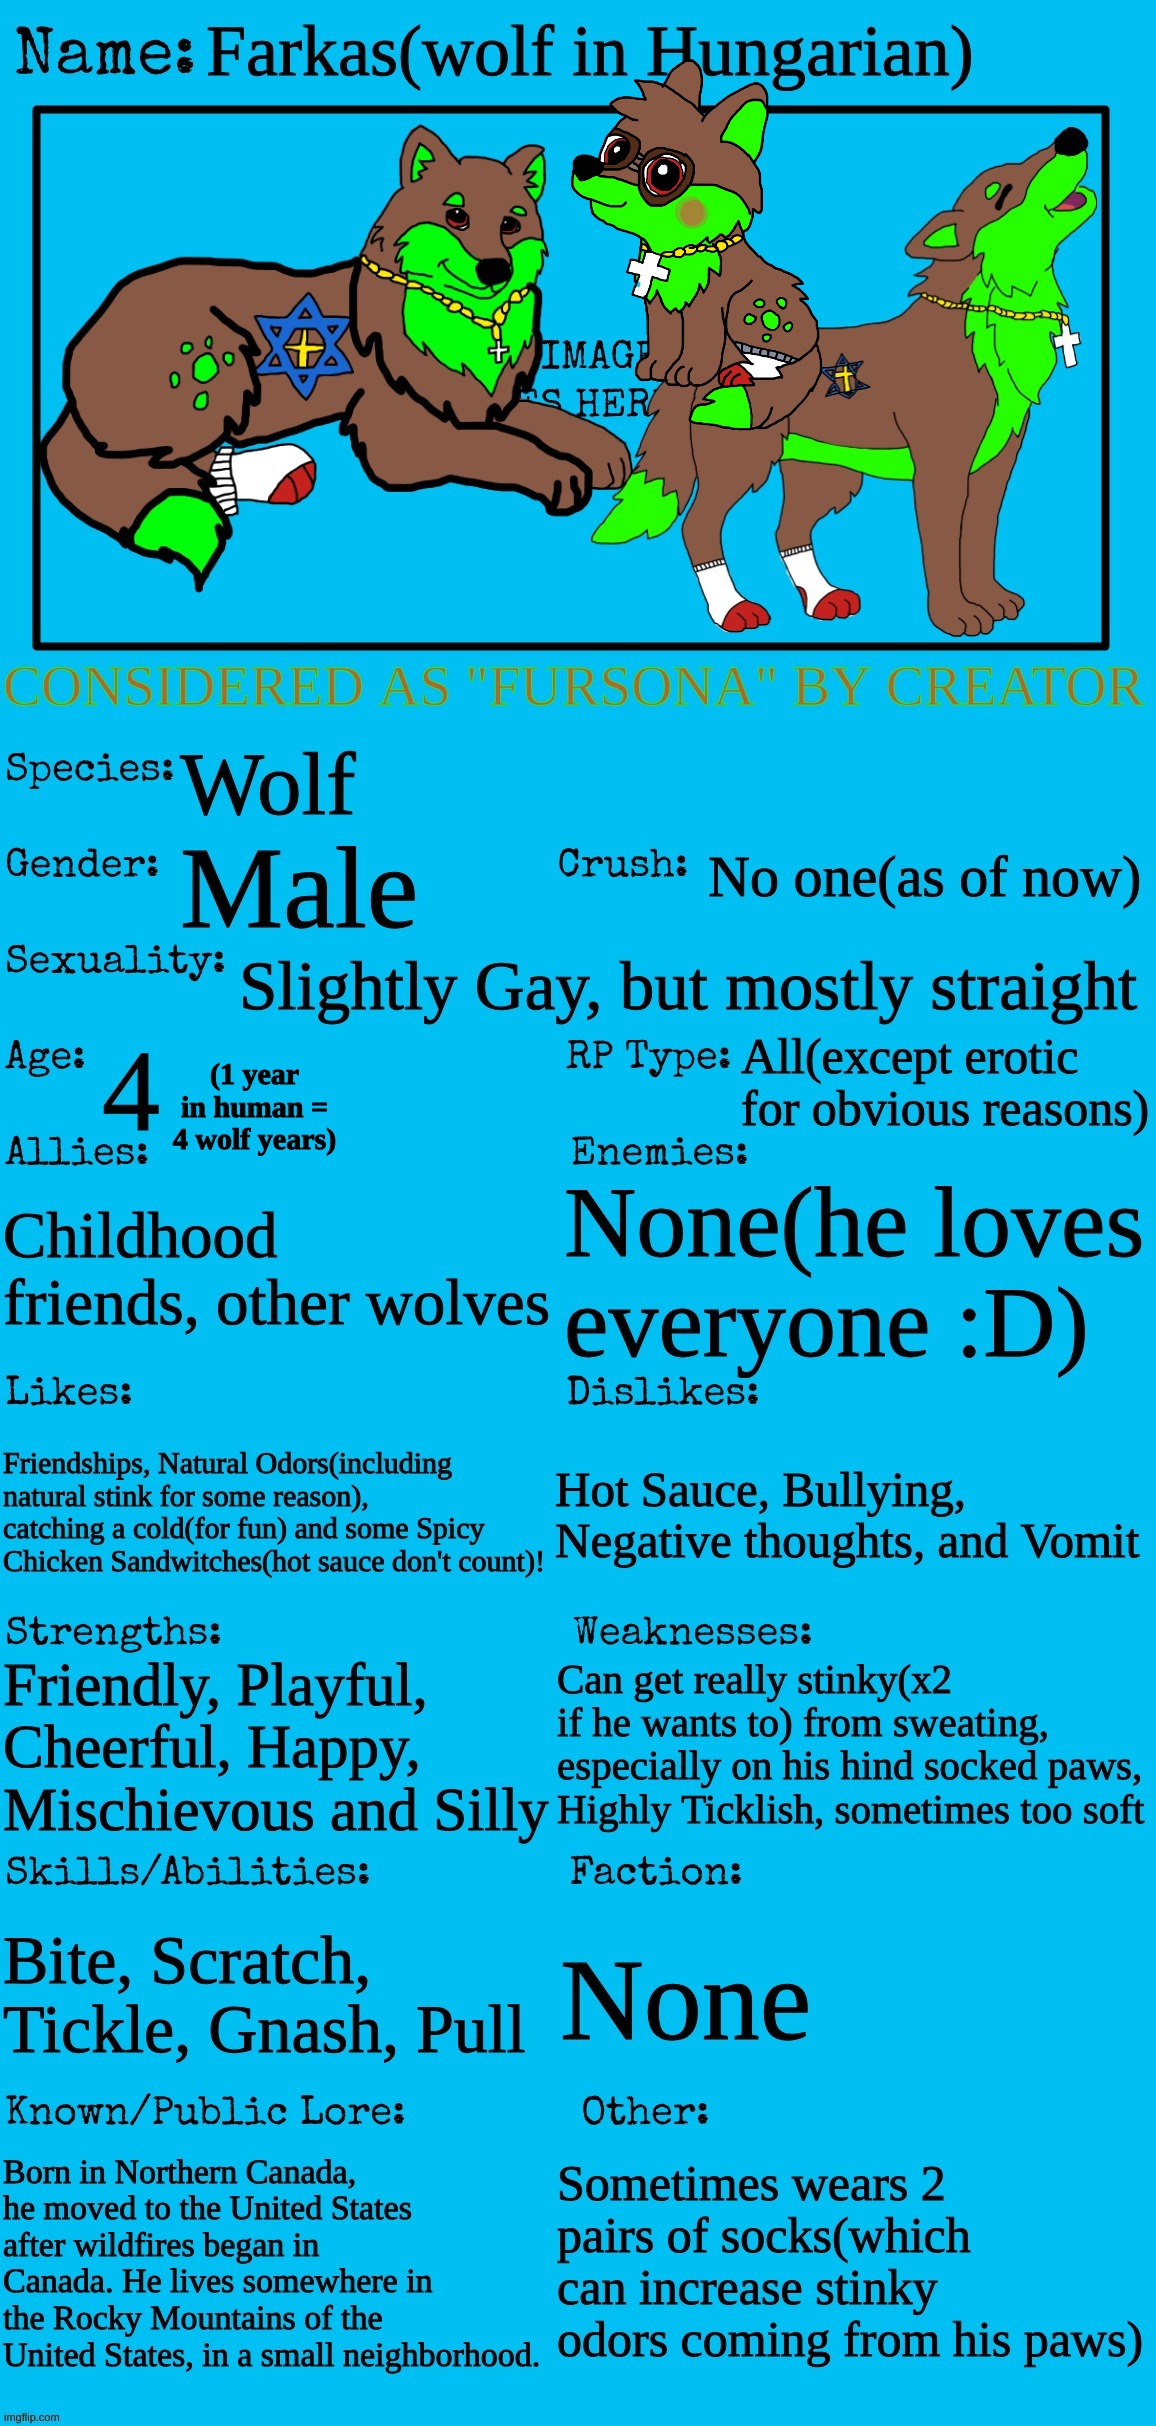 (1 year in human = 4 wolf years) | made w/ Imgflip meme maker